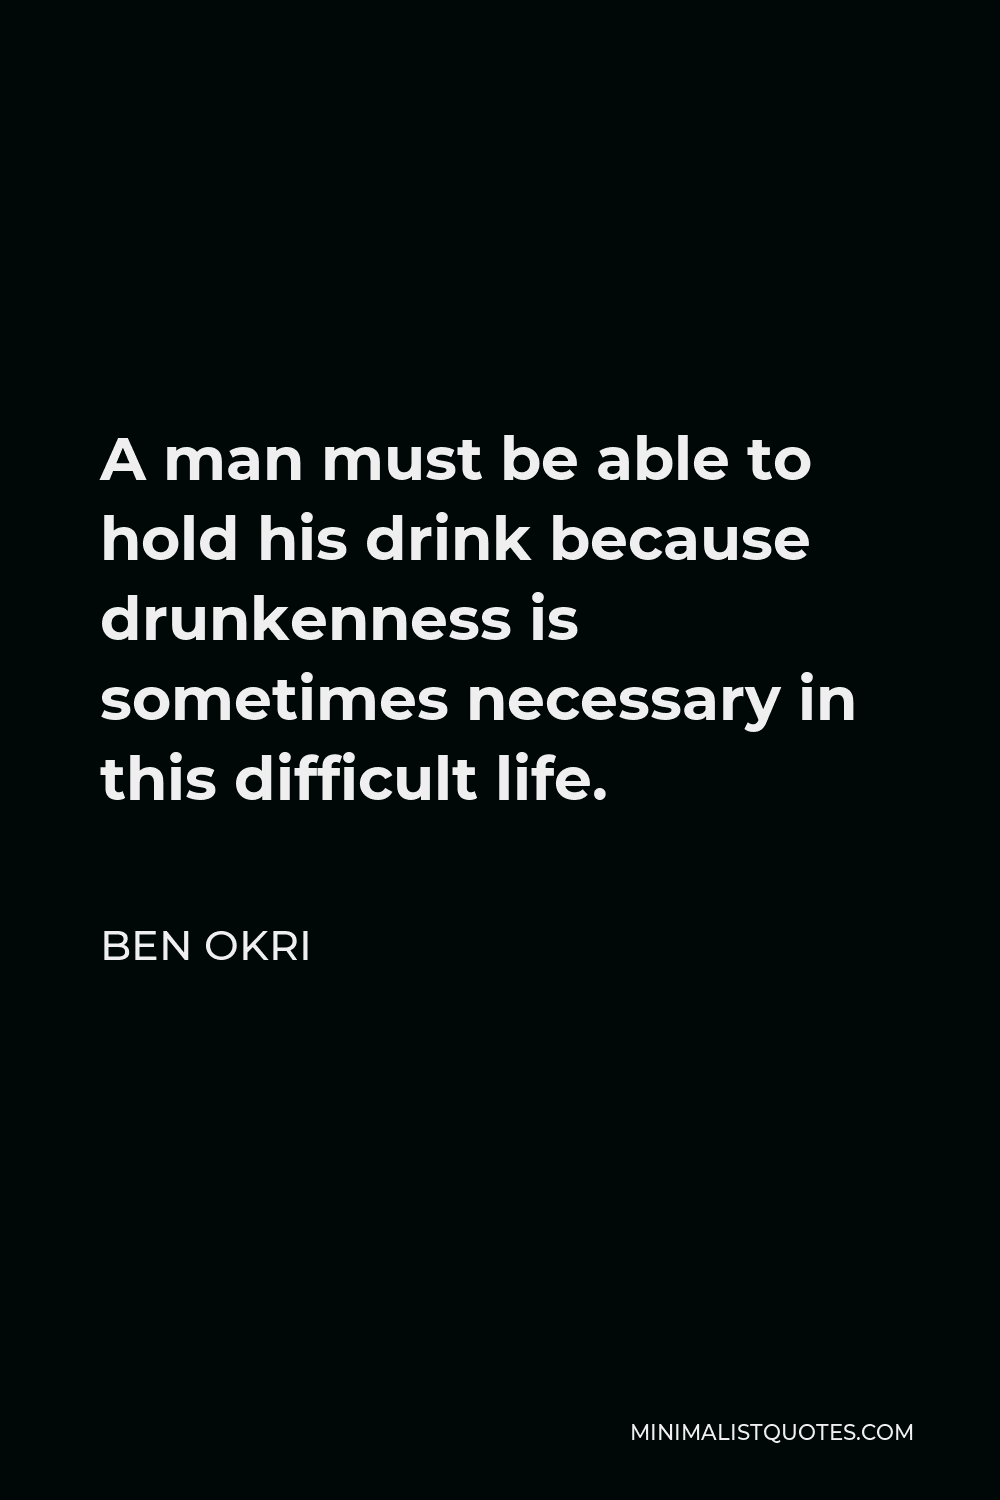 Ben Okri Quote - A man must be able to hold his drink because drunkenness is sometimes necessary in this difficult life.